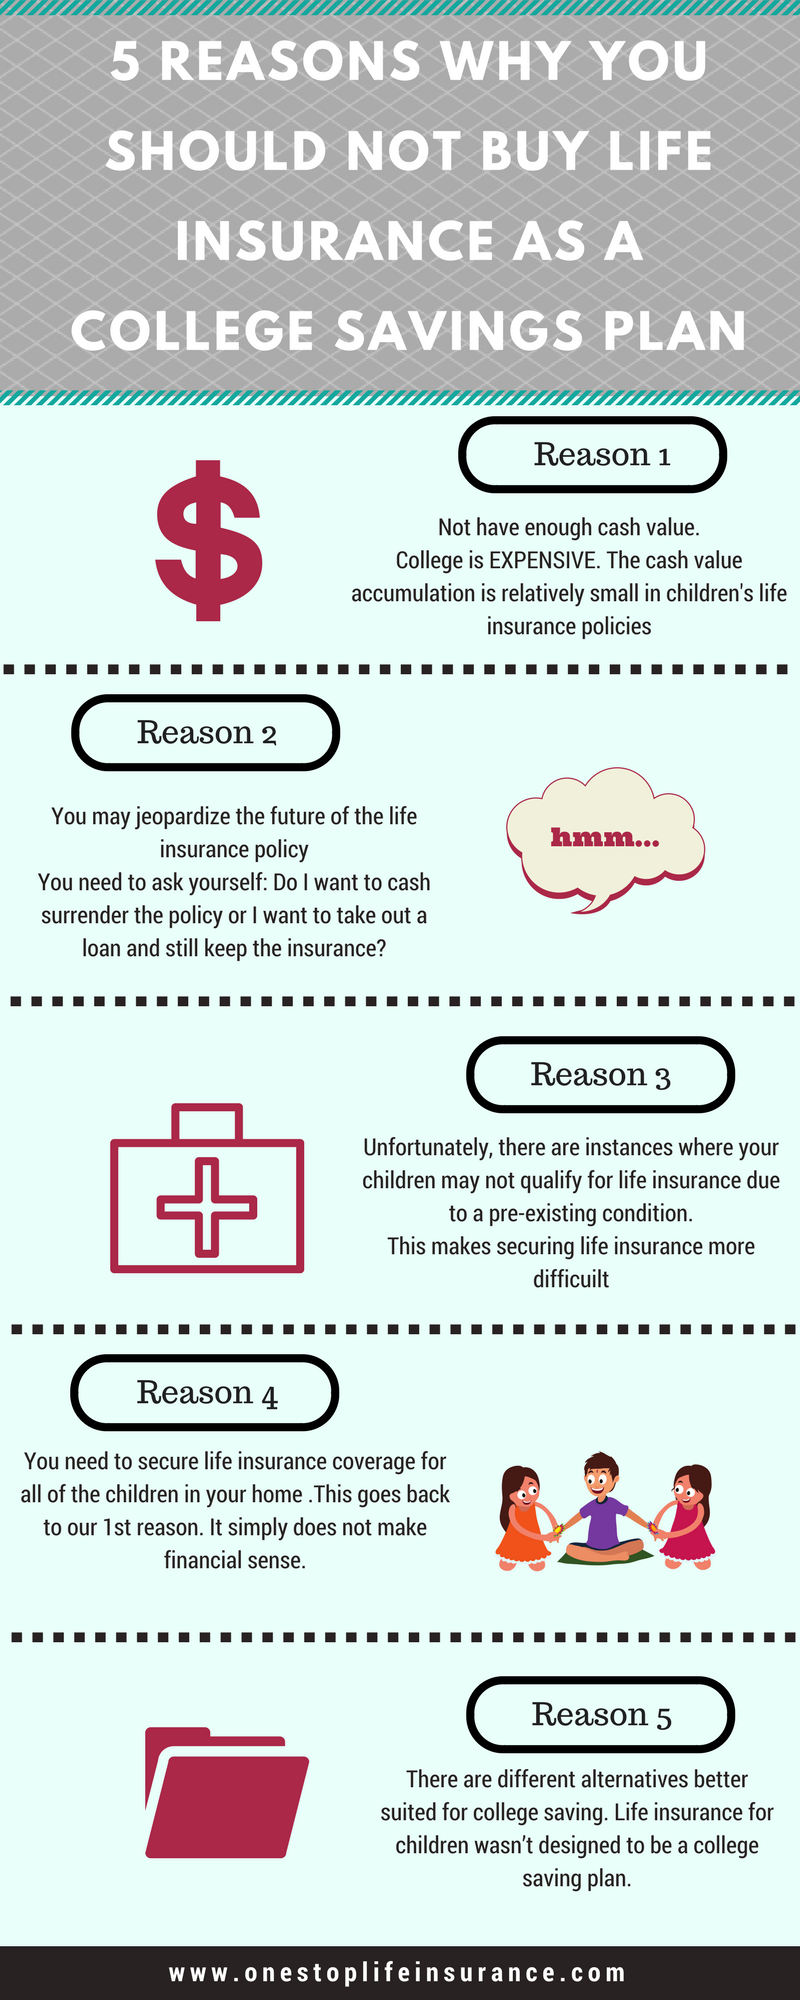 Top 5 Reasons why NOT to buy life insurance as a college savings plan